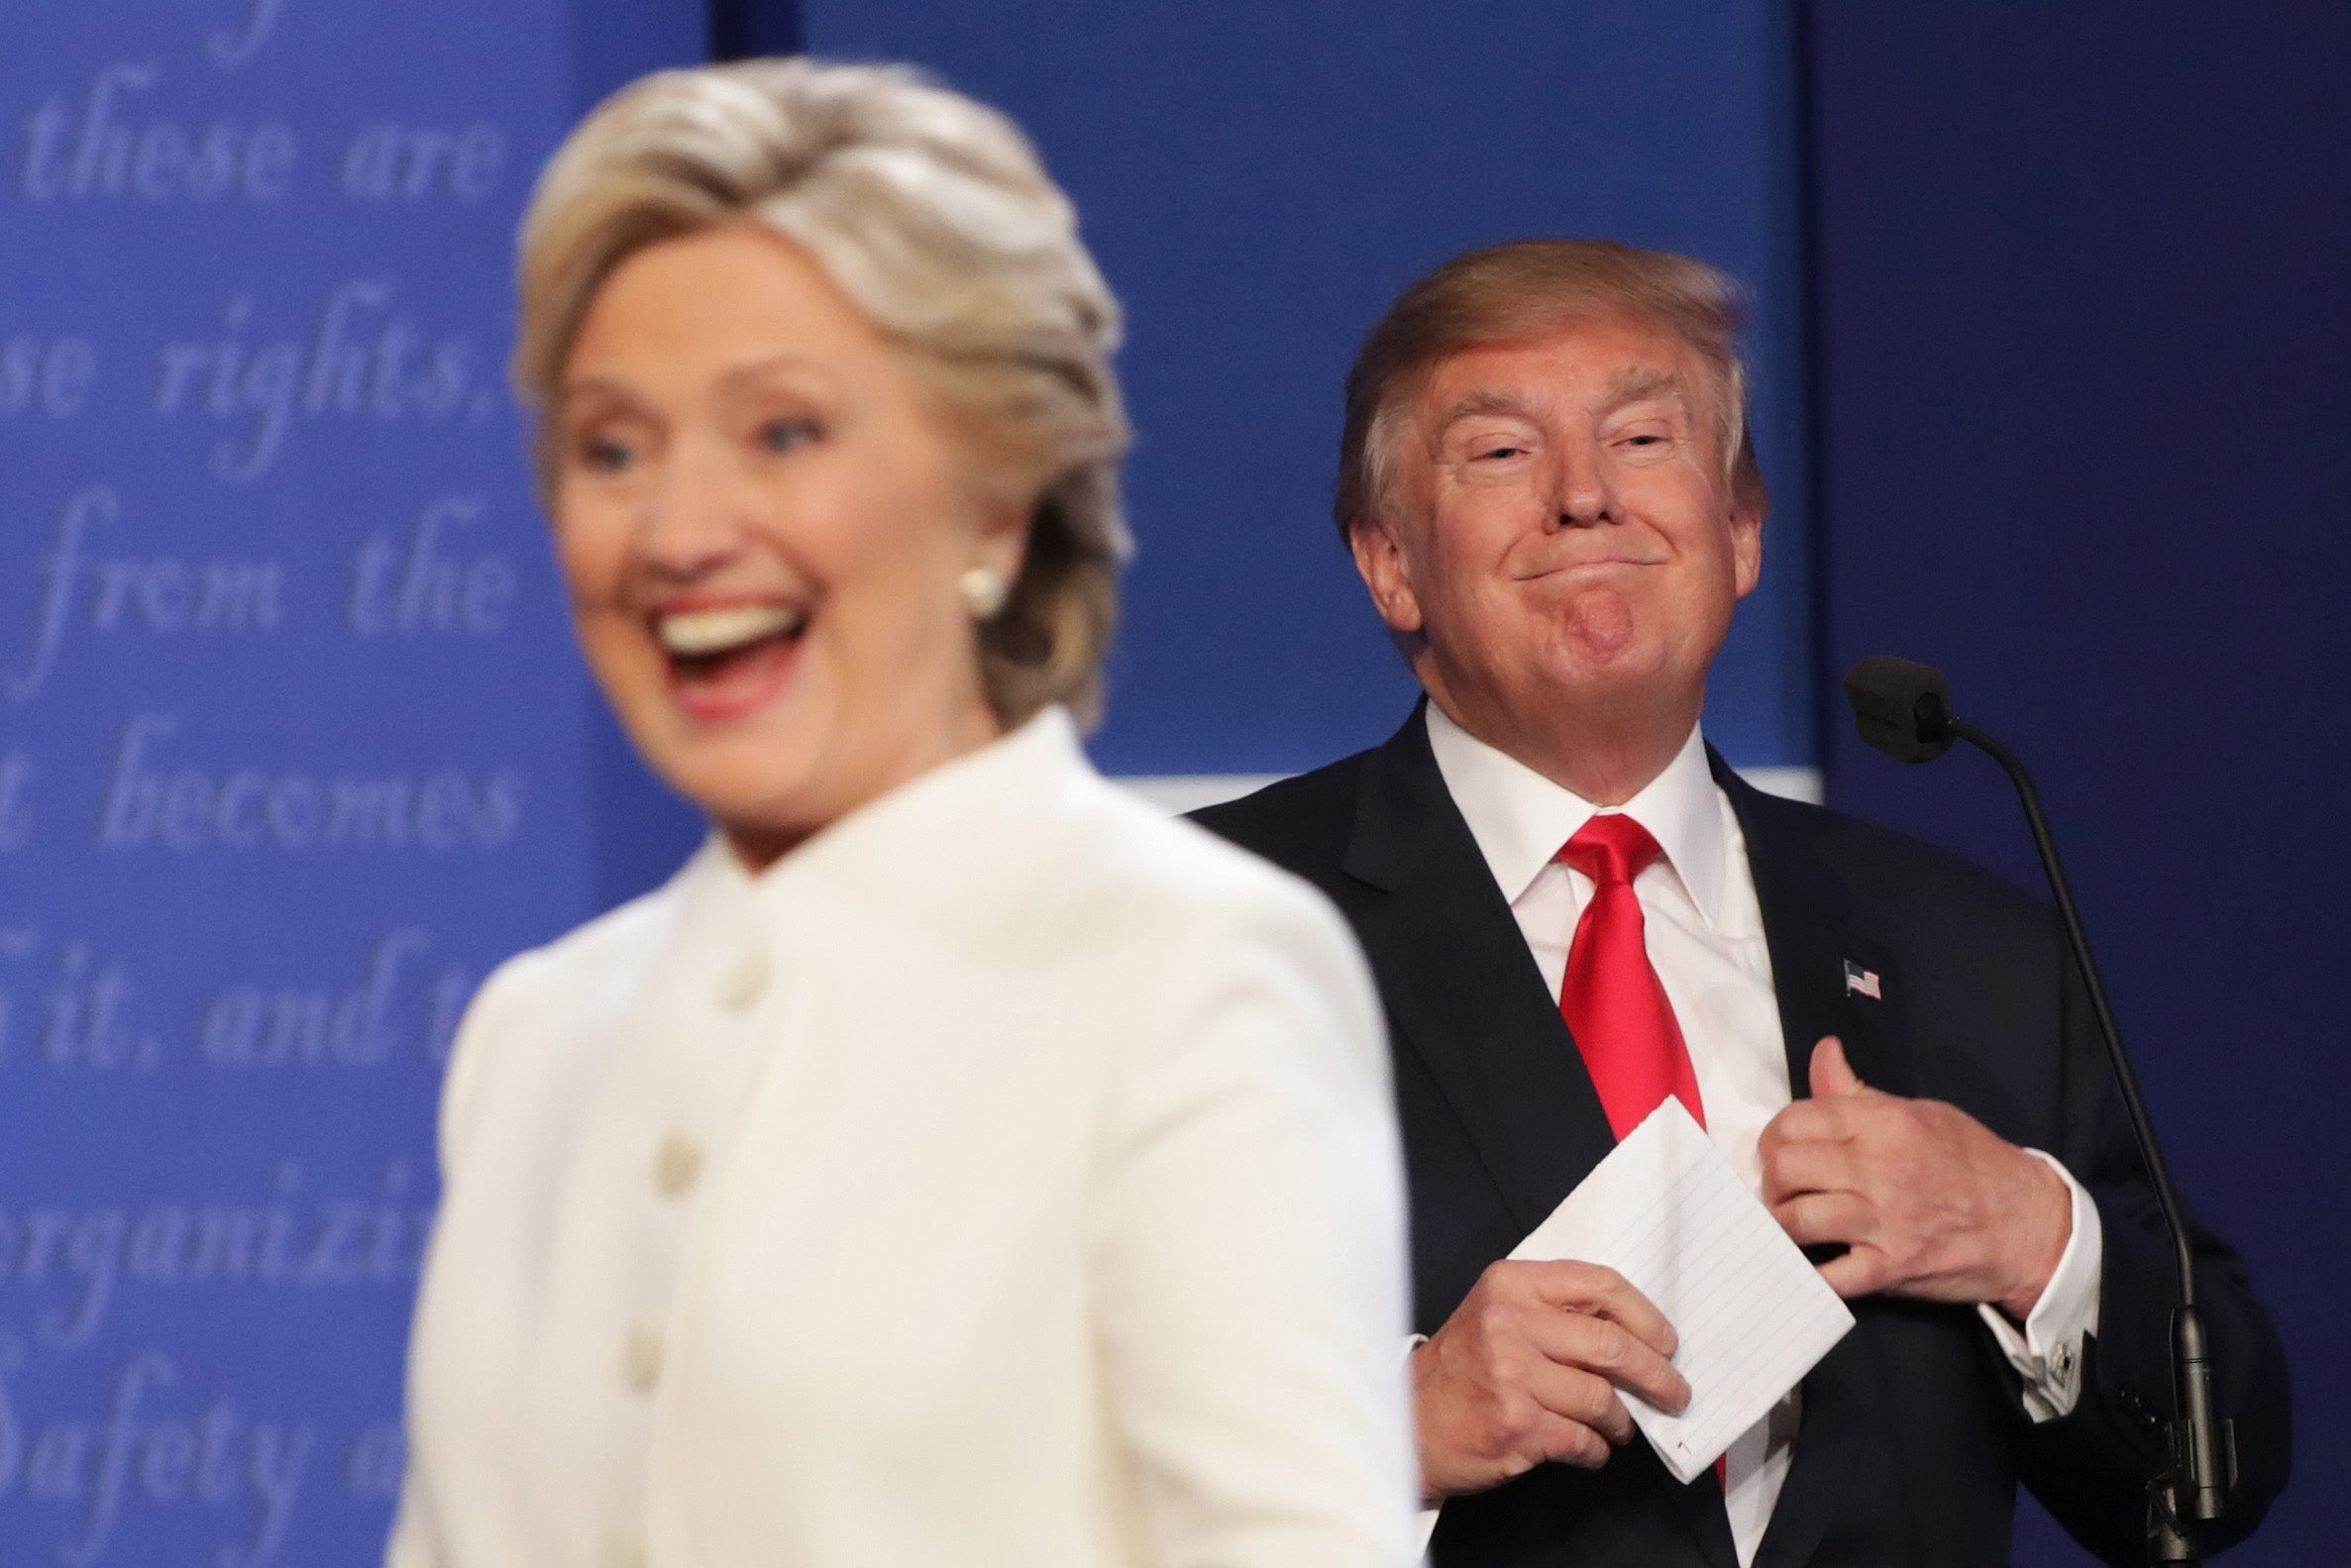 Former Secretary of State Hillary Clinton and Donald Trump at a presidential campaign debate in October 2016